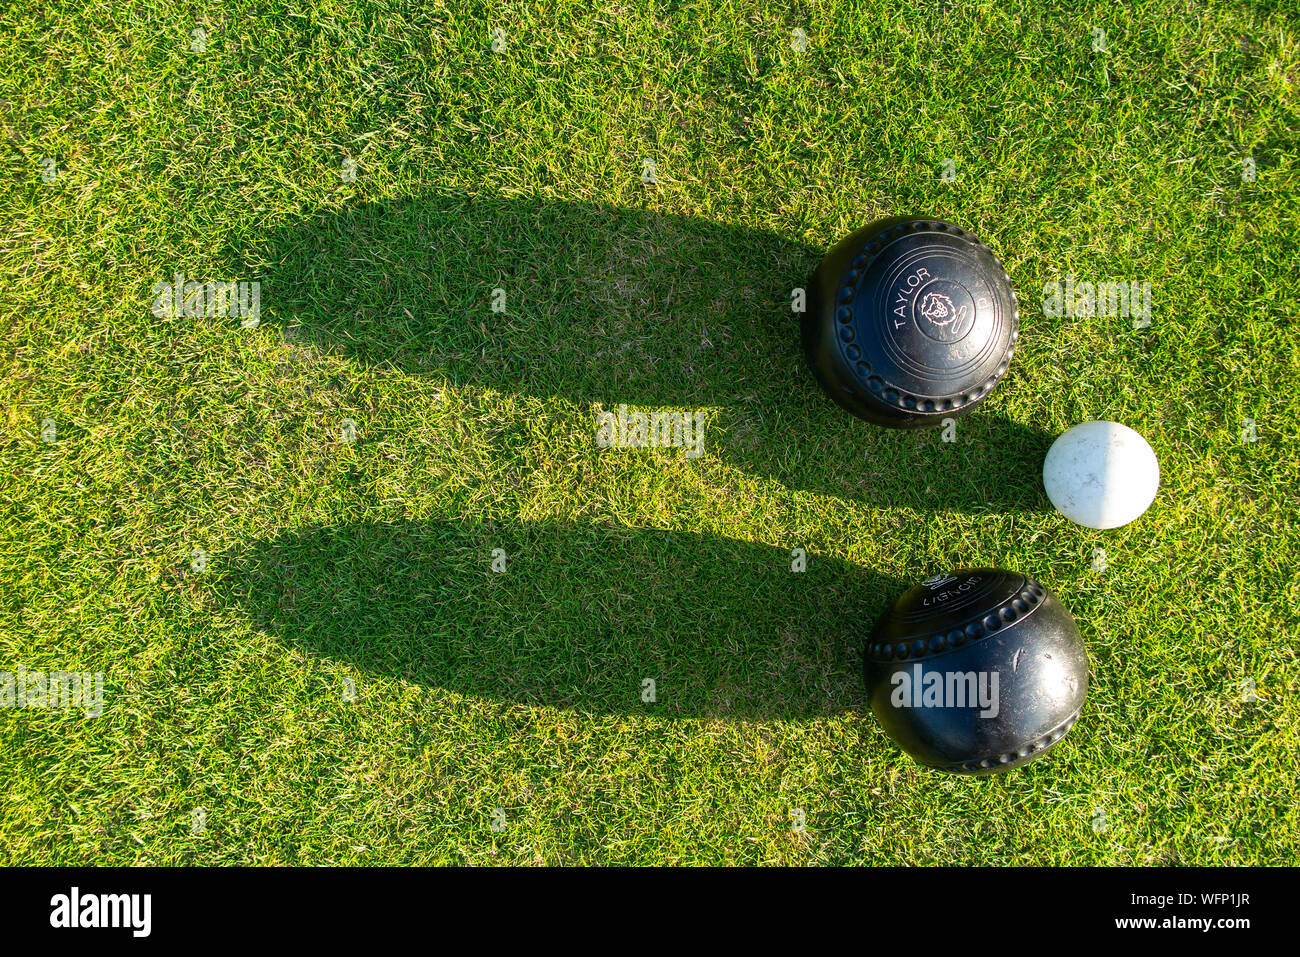 Bowling balls near the jack ball seen from above in a lawn bowls competition Stock Photo